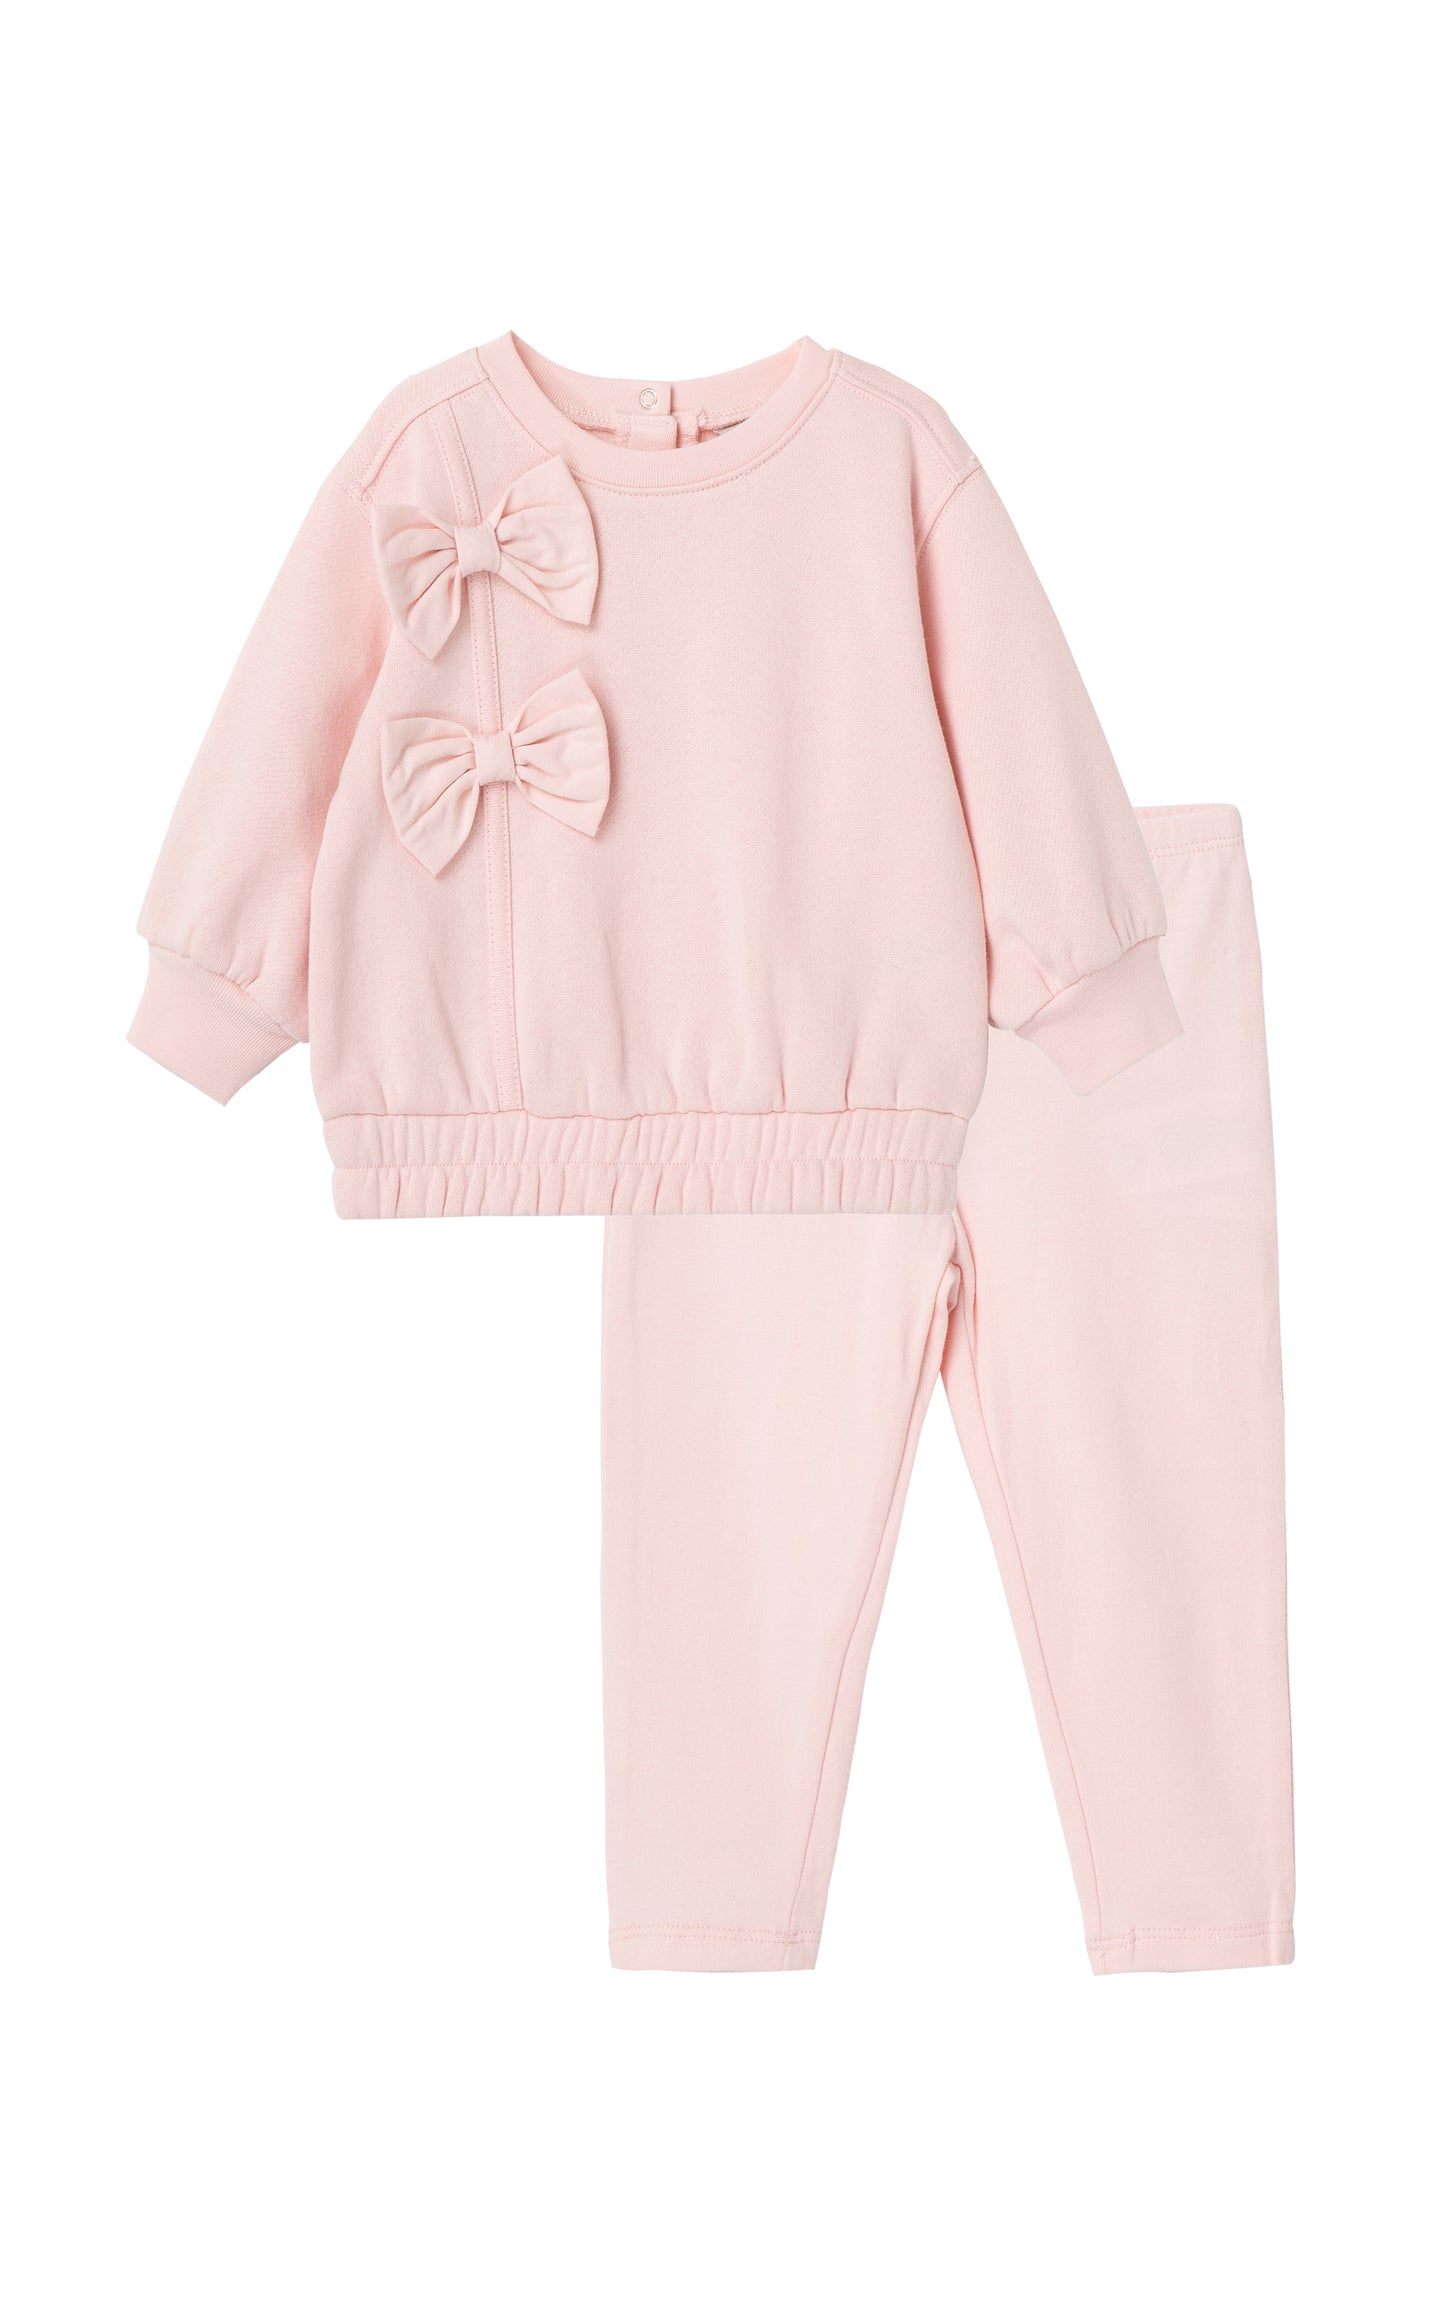 Front view of pink fleece sweatshirt set with a bow 